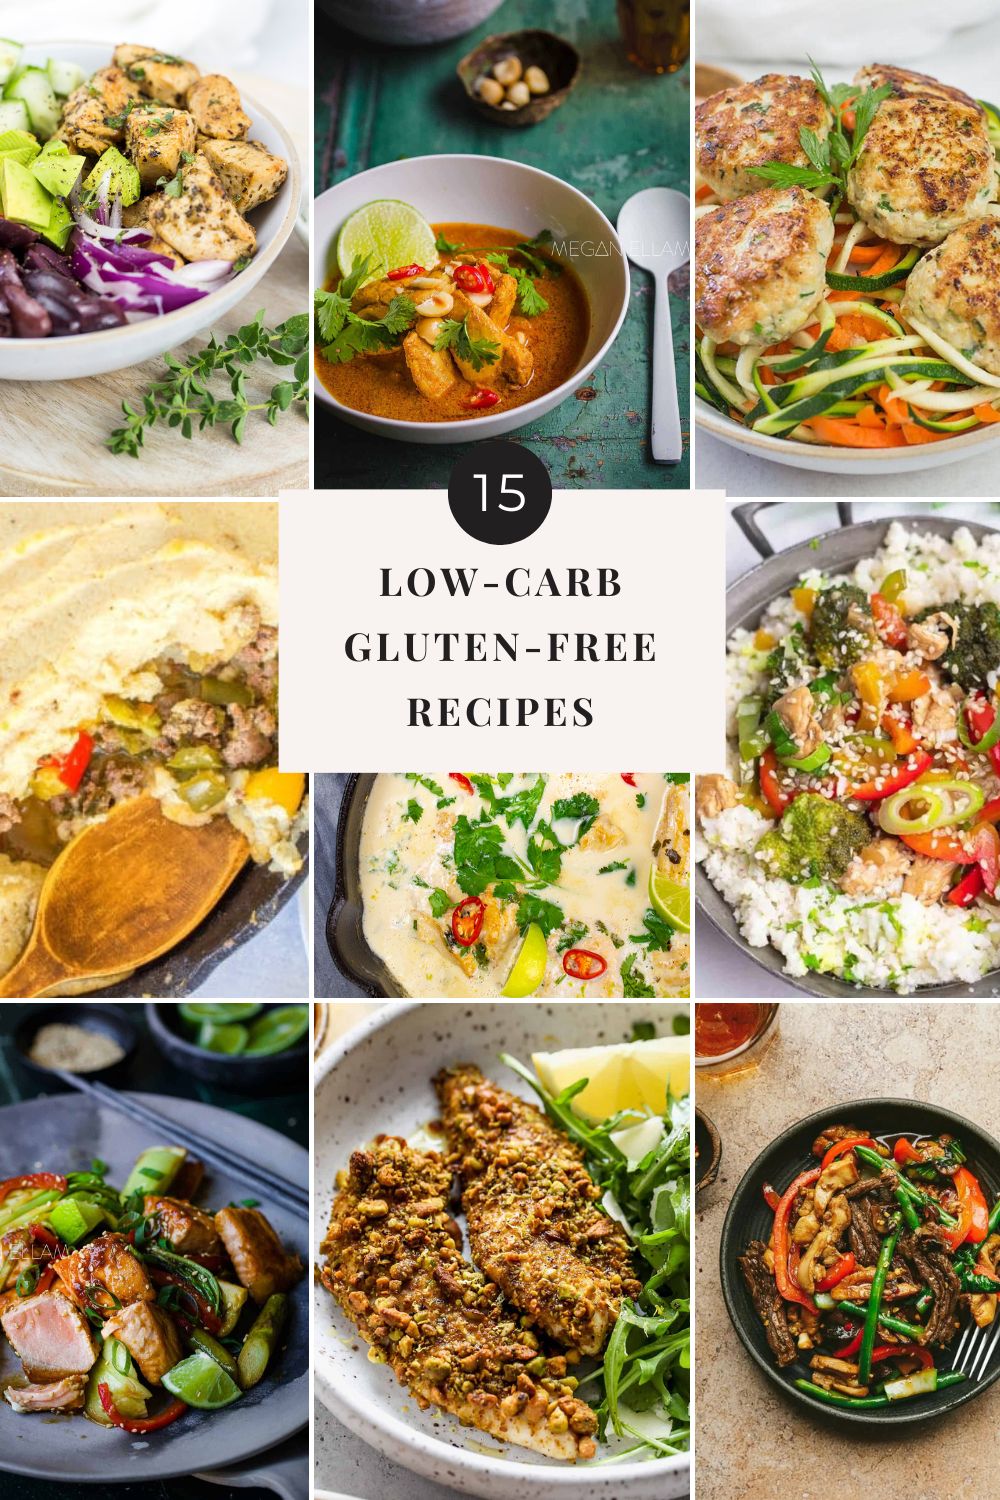 Gluten-Free Low Carb Recipes - Collage of photos with text overlay.